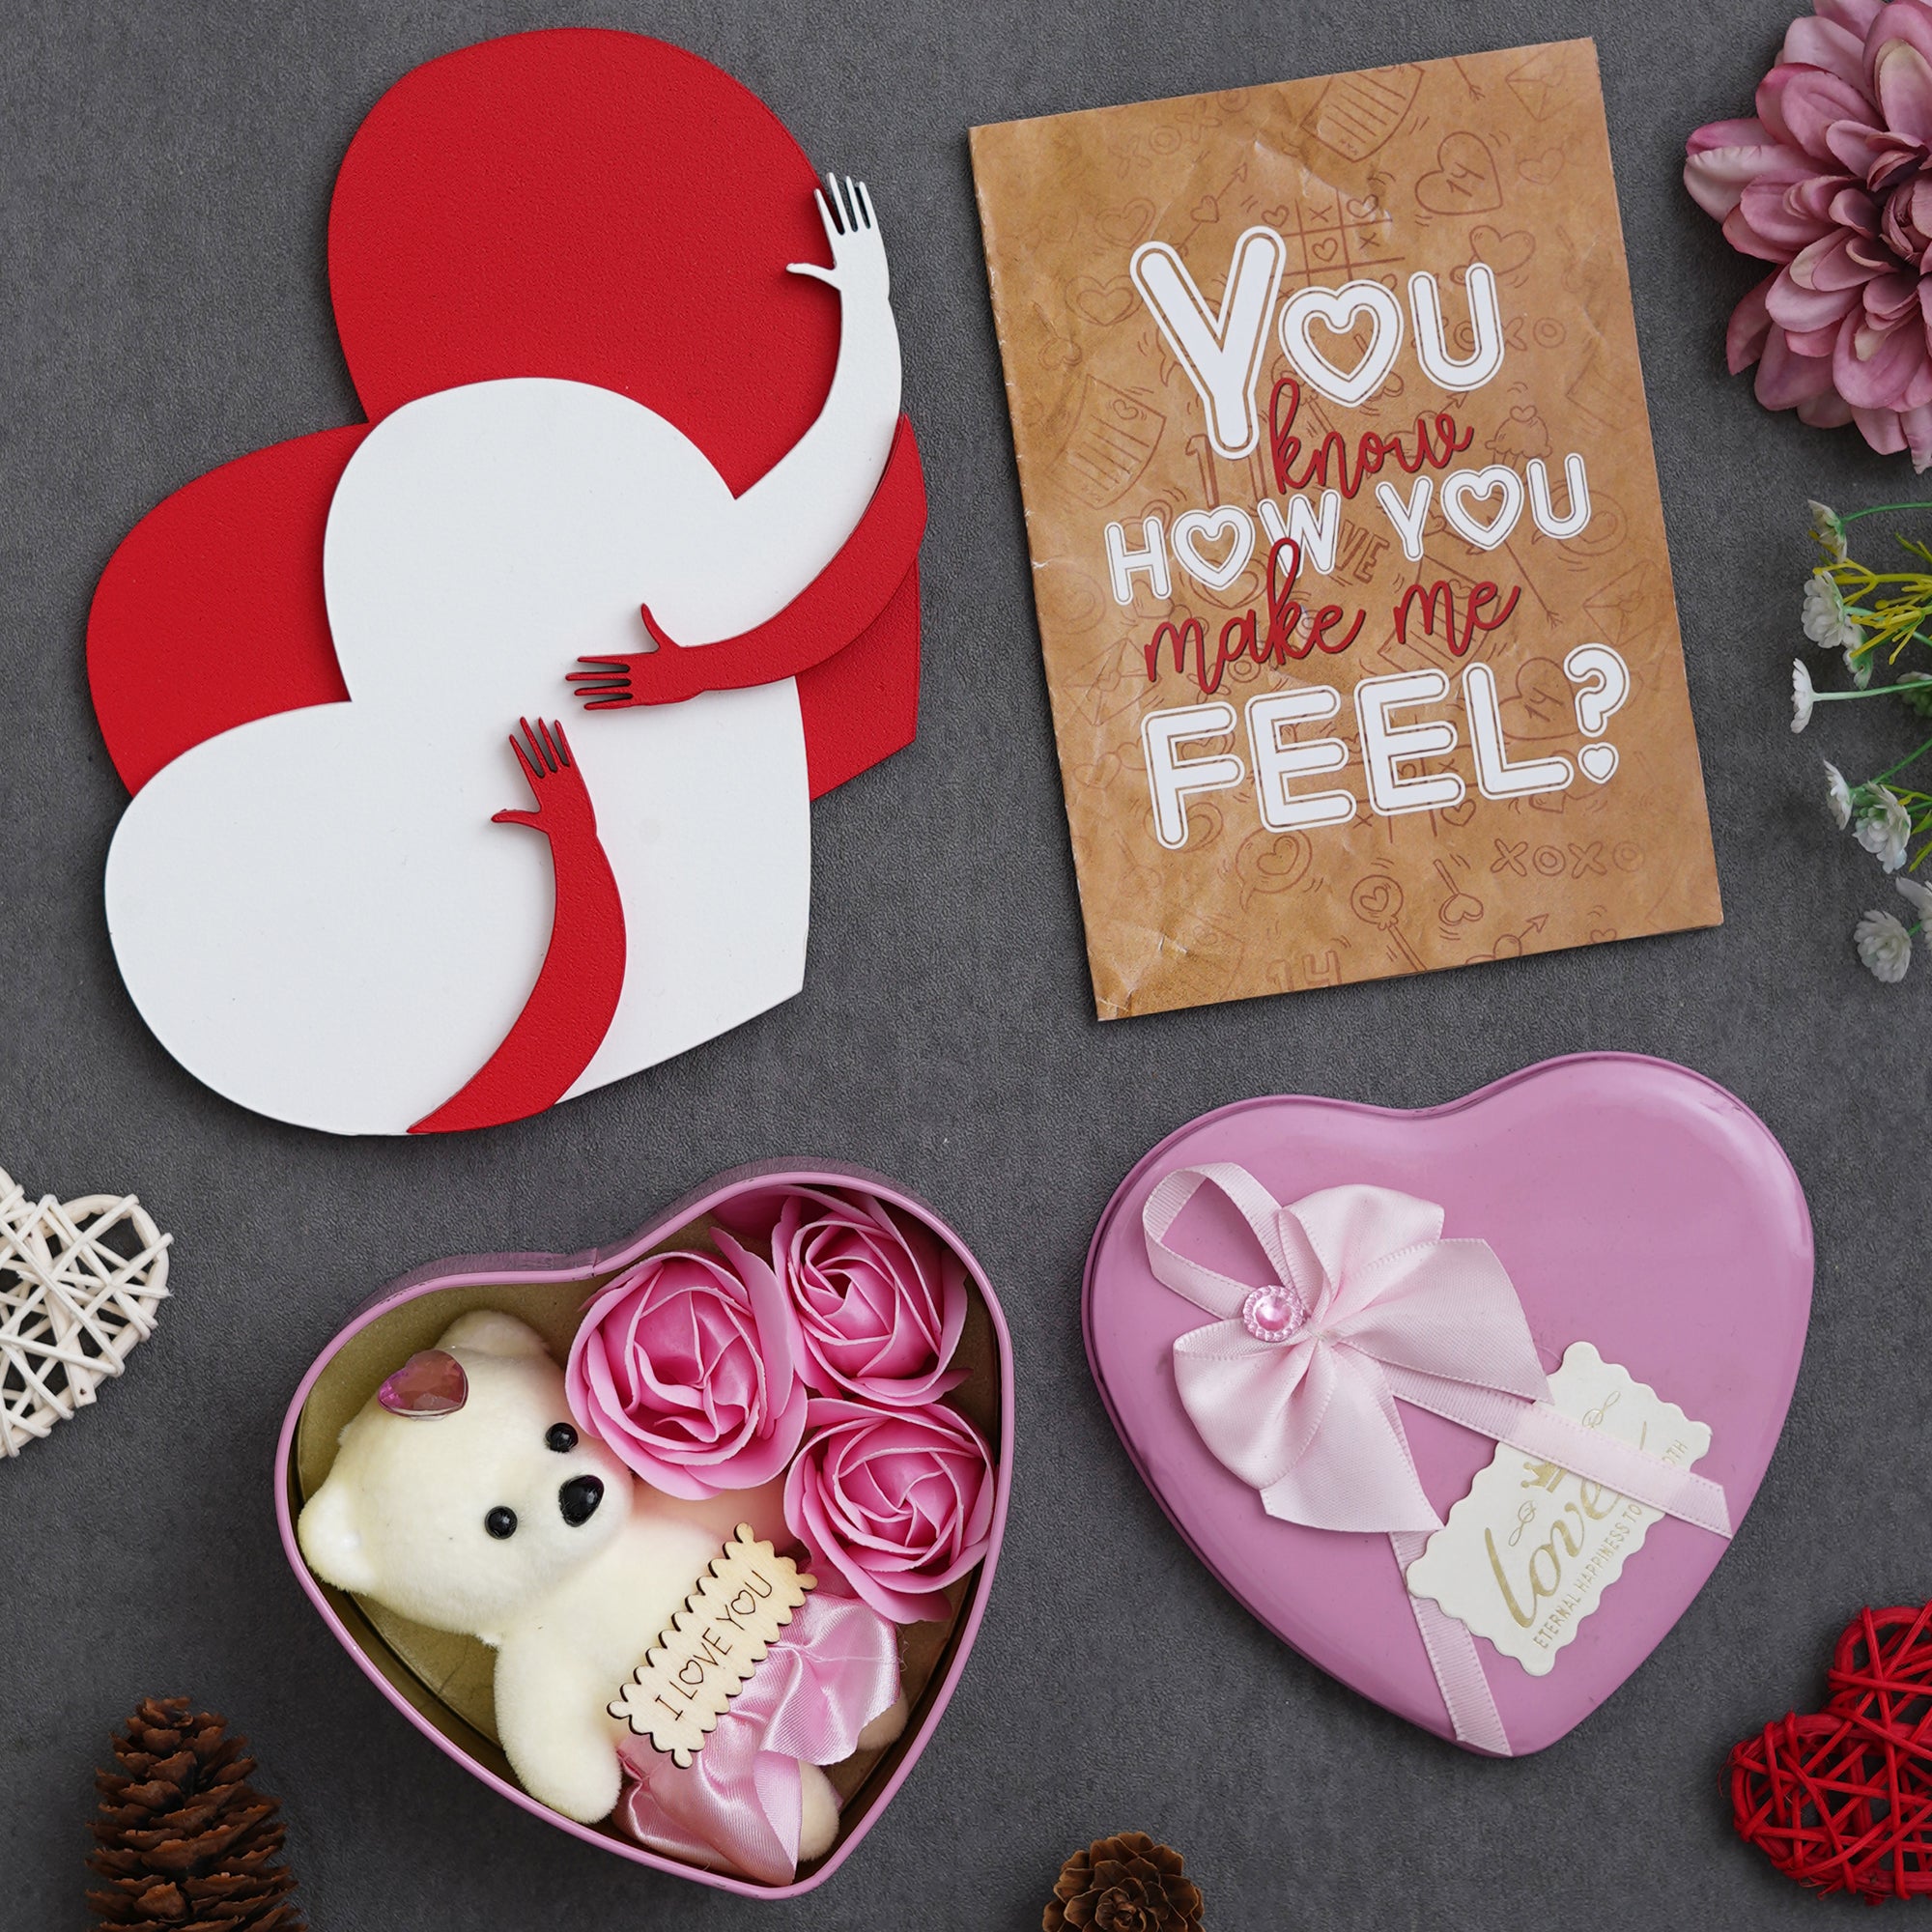 Valentine Combo of Card, Red and White Heart Hugging Each Other Gift Set, Pink Heart Shaped Gift Box with Teddy and Roses